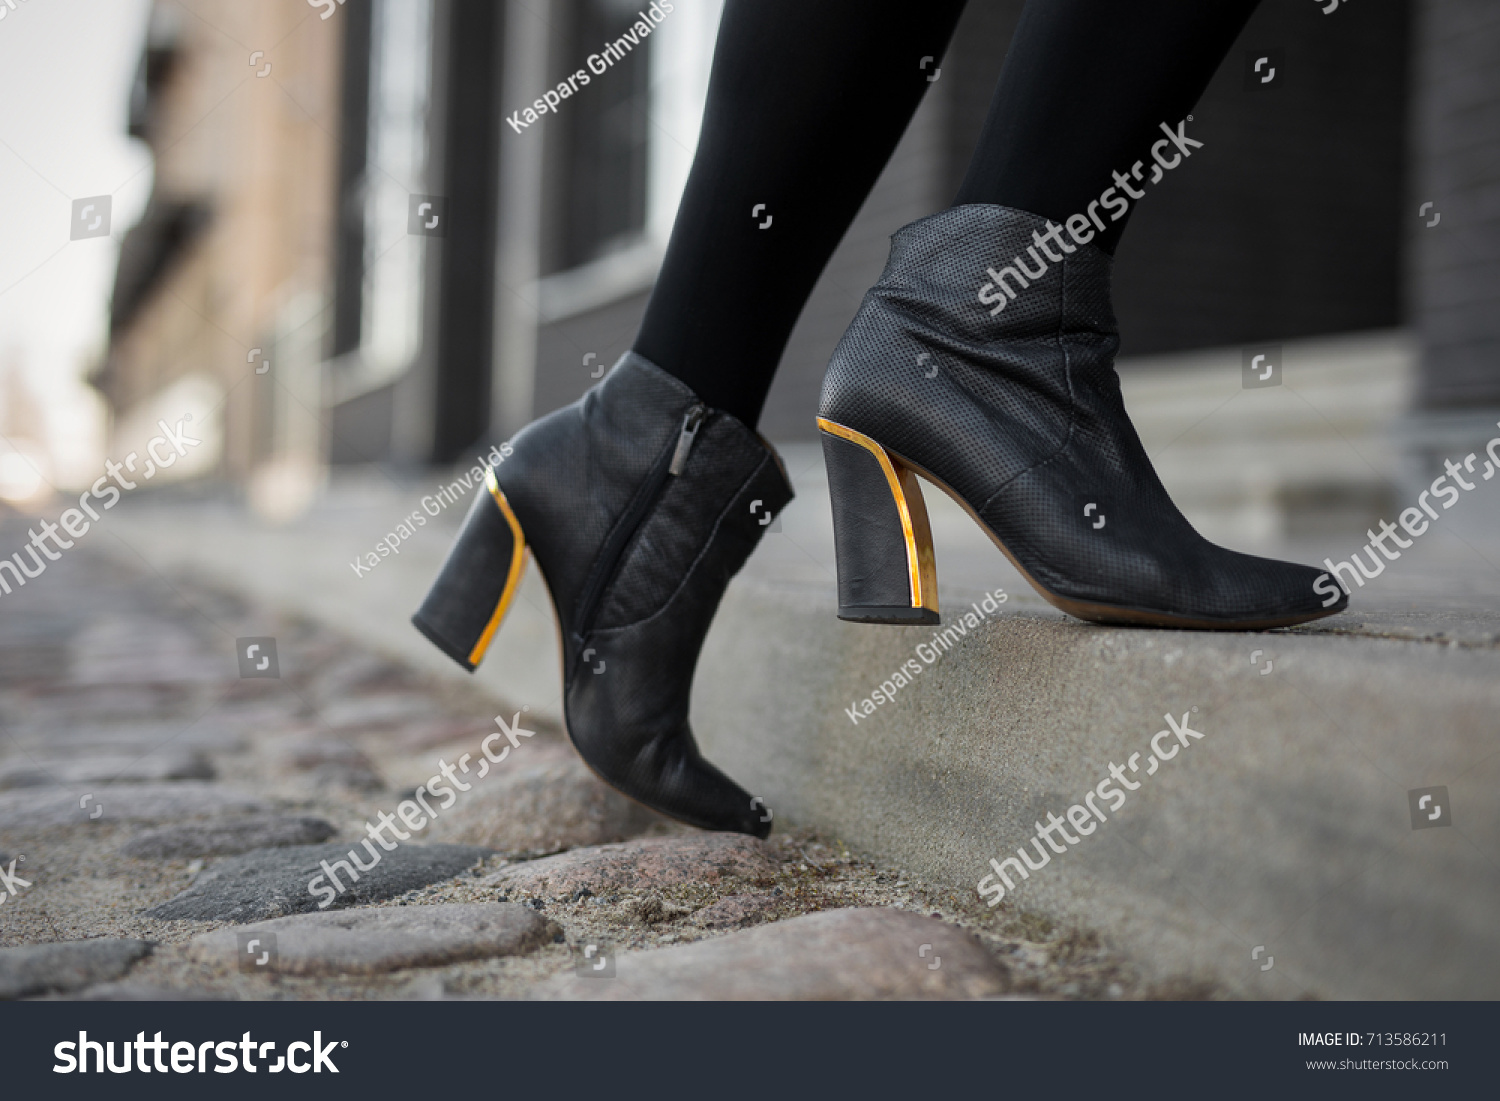 138,238 Leggings With Boots Images, Stock Photos & Vectors | Shutterstock